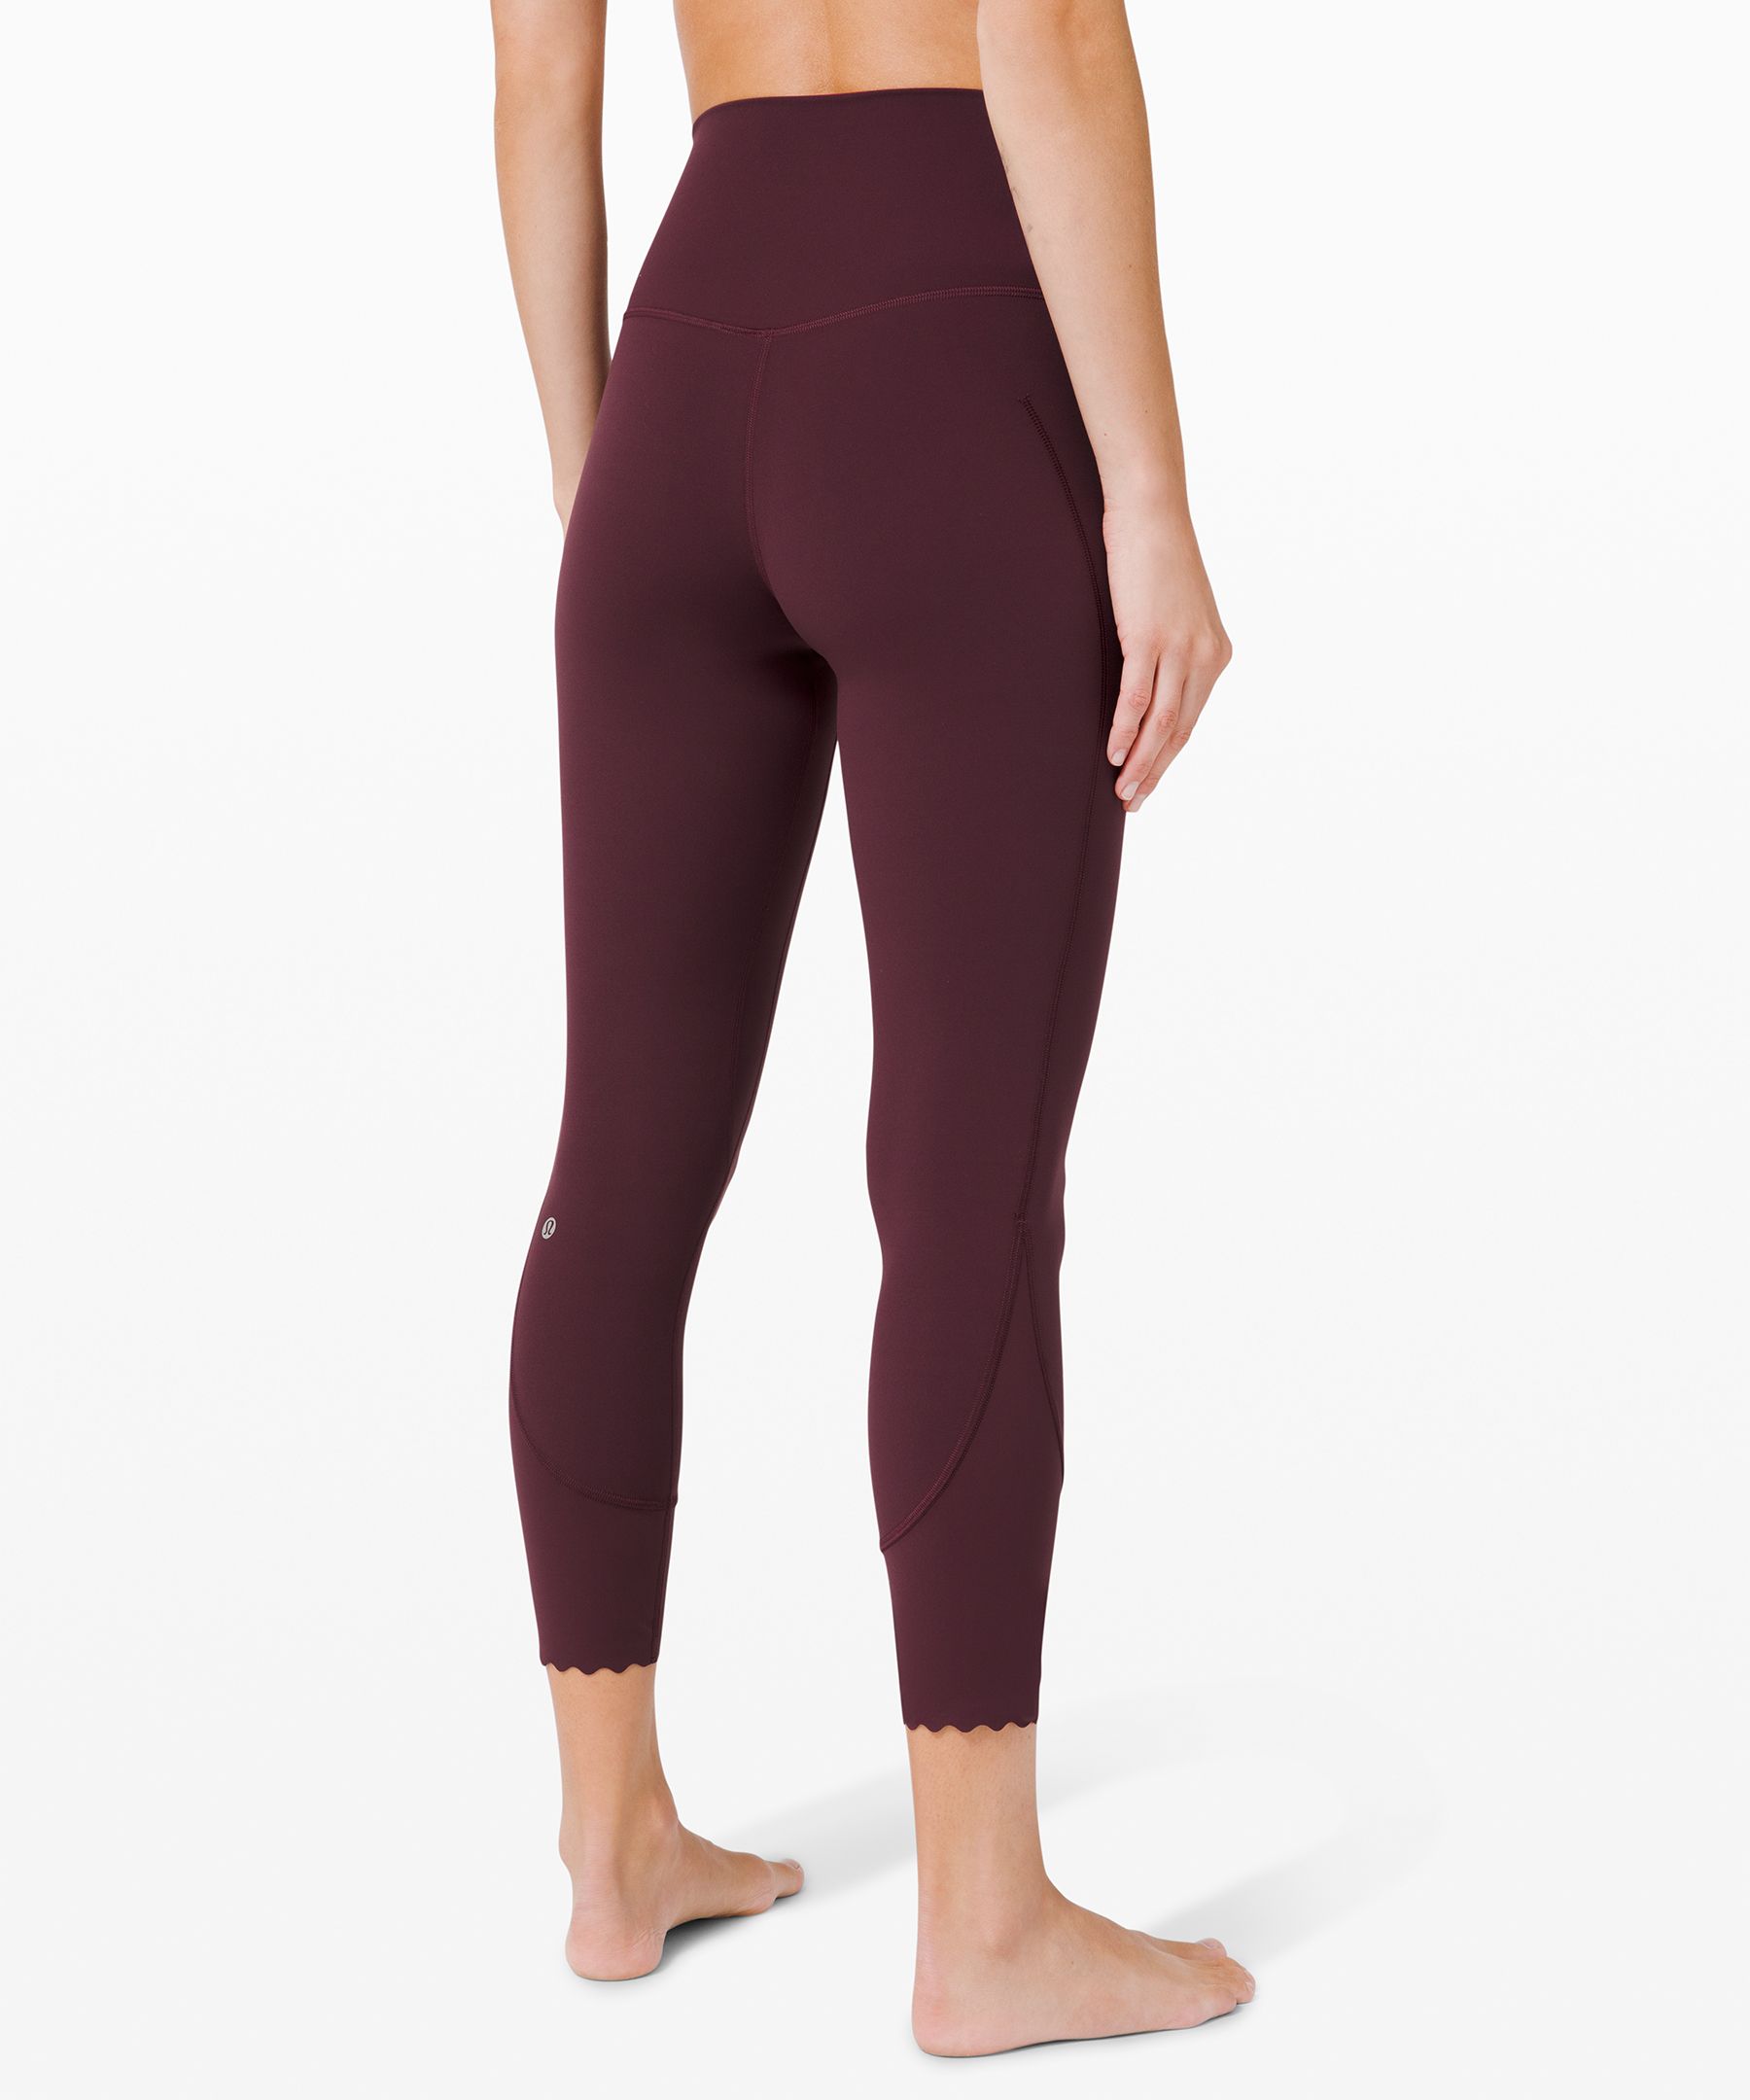 Lululemon Align Hr Pant 25 Scallops For Sale  International Society of  Precision Agriculture